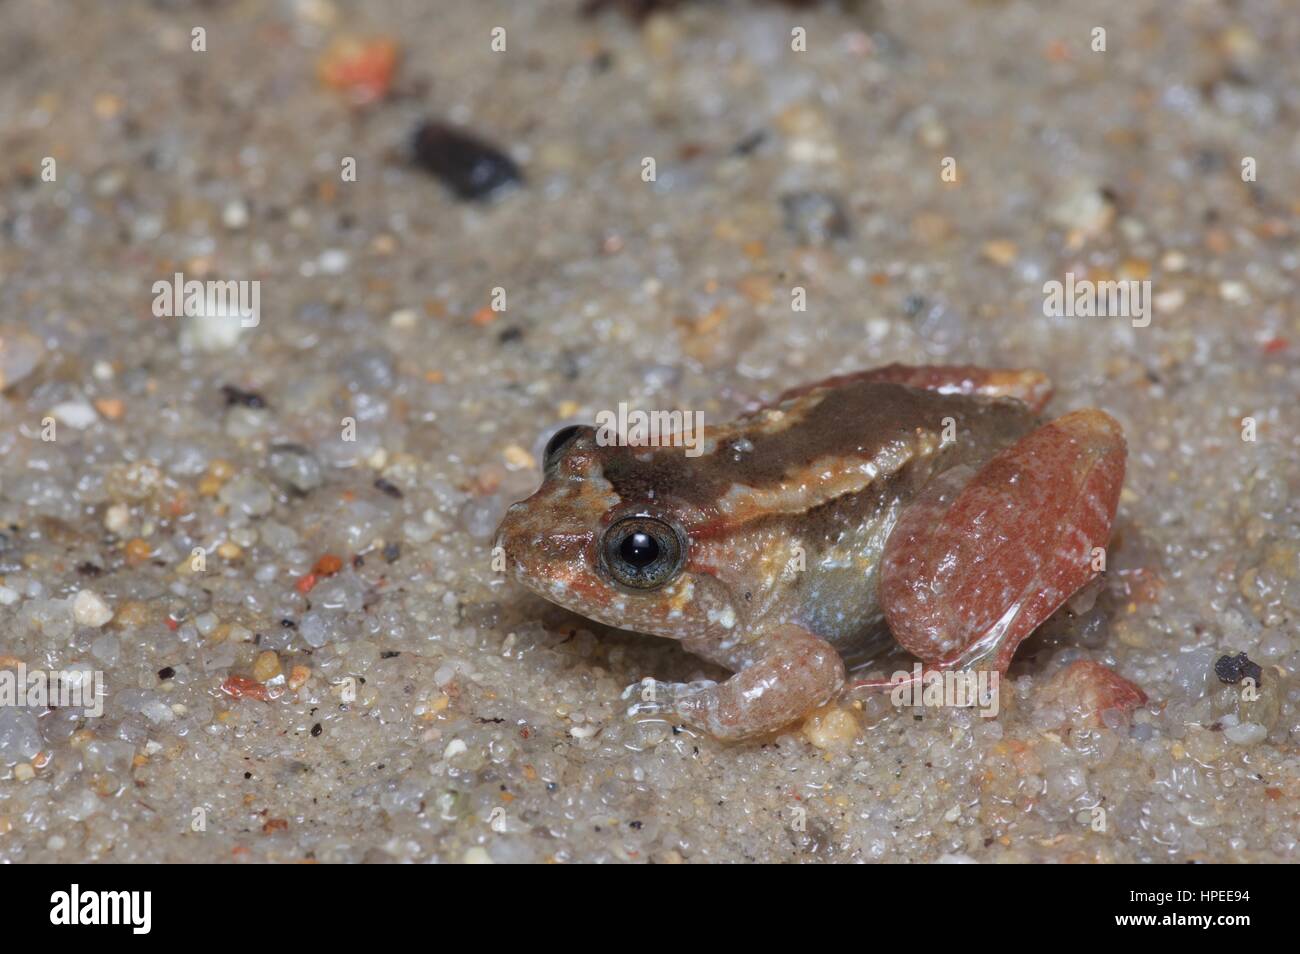 A Tanahrata Wart Frog (Limnonectes nitrides) in the wet sand in the rainforest at Ulu Semenyih, Selangor, Malaysia Stock Photo